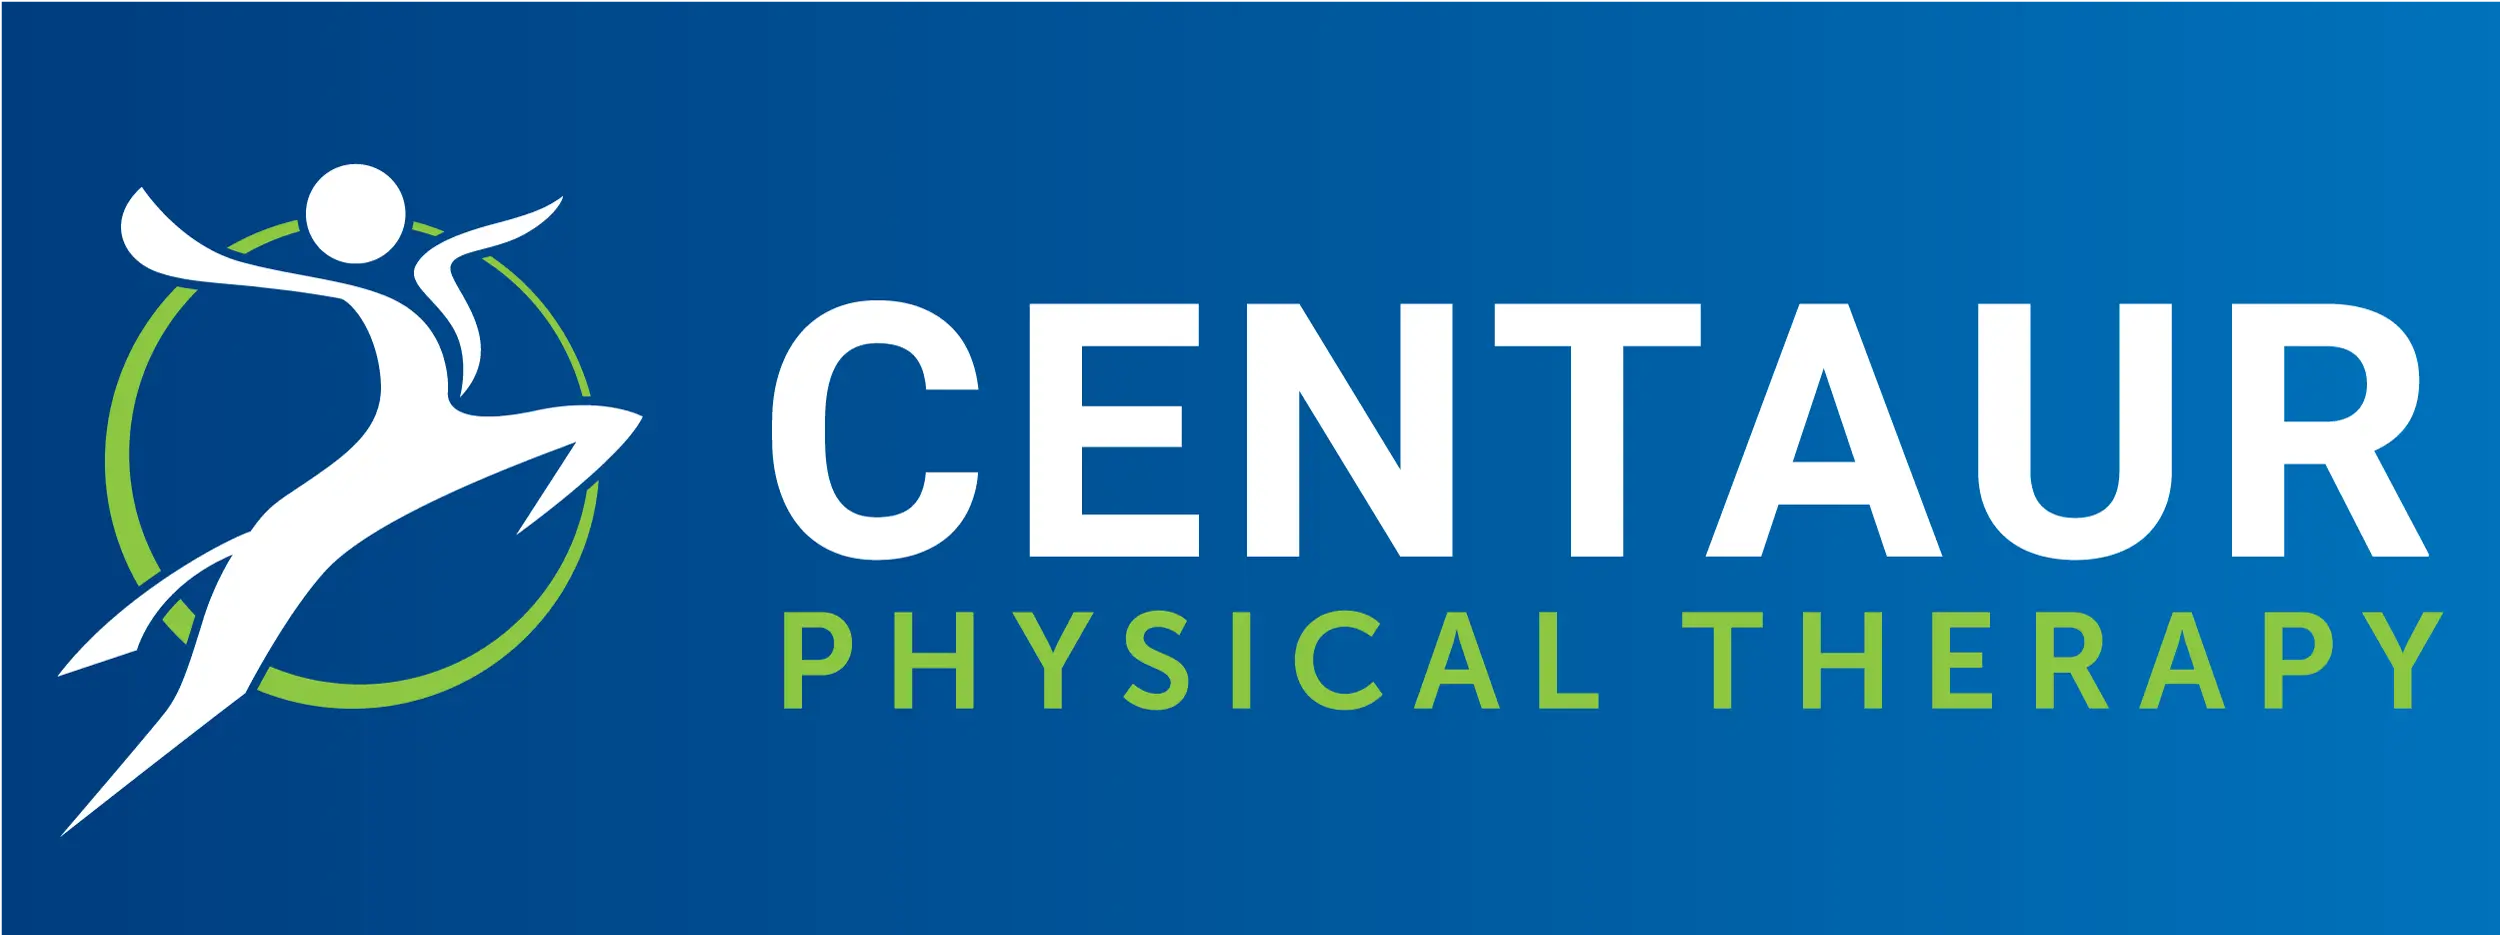 Centaur Physical Therapy Website Logo